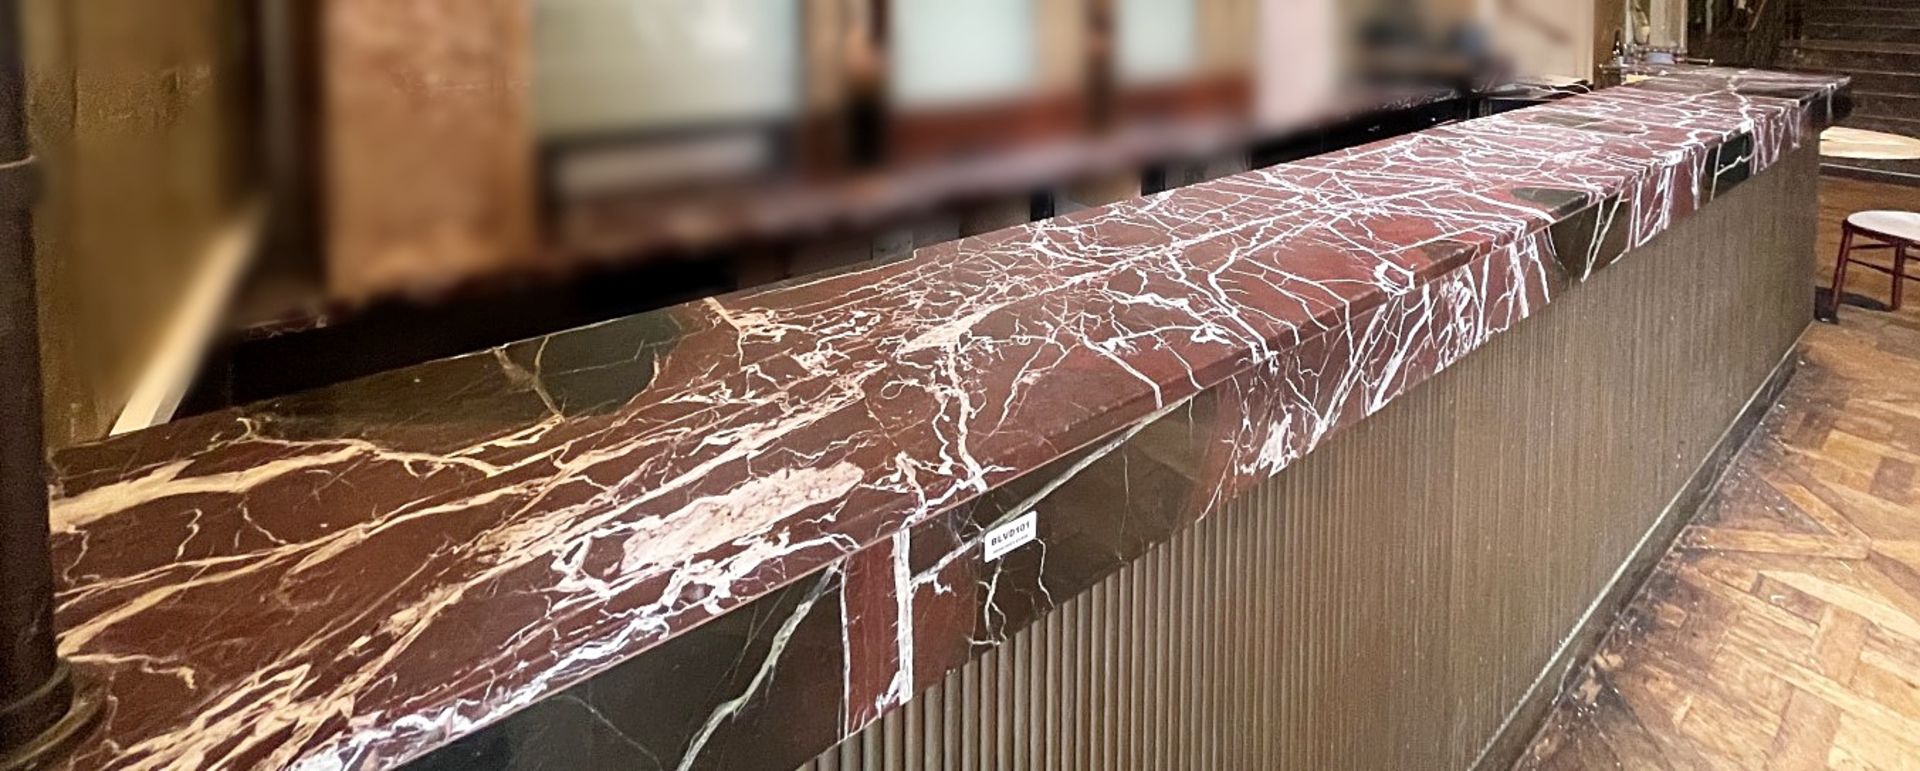 1 x Marble Topped 4.6 Metre Long Bar Front Counter With Stainless Steel Area - Ref: BLVD101 - - Image 2 of 12